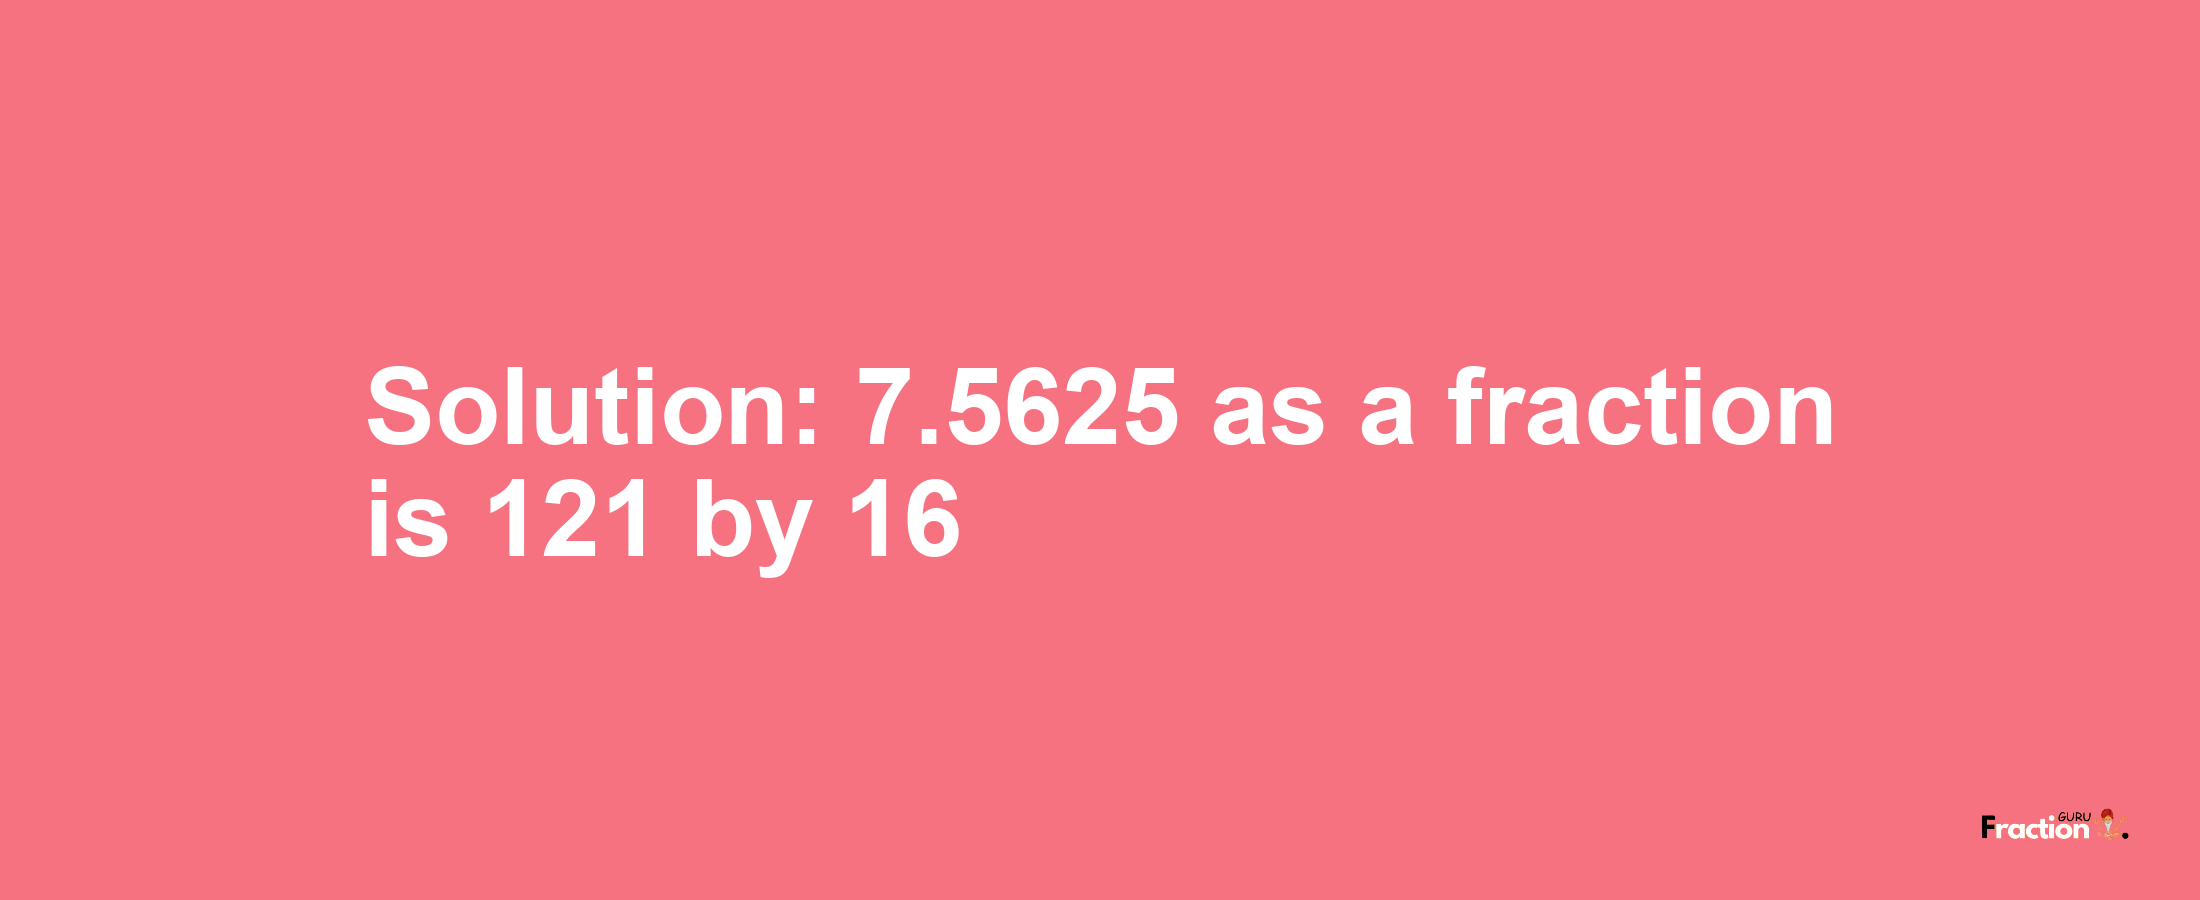 Solution:7.5625 as a fraction is 121/16